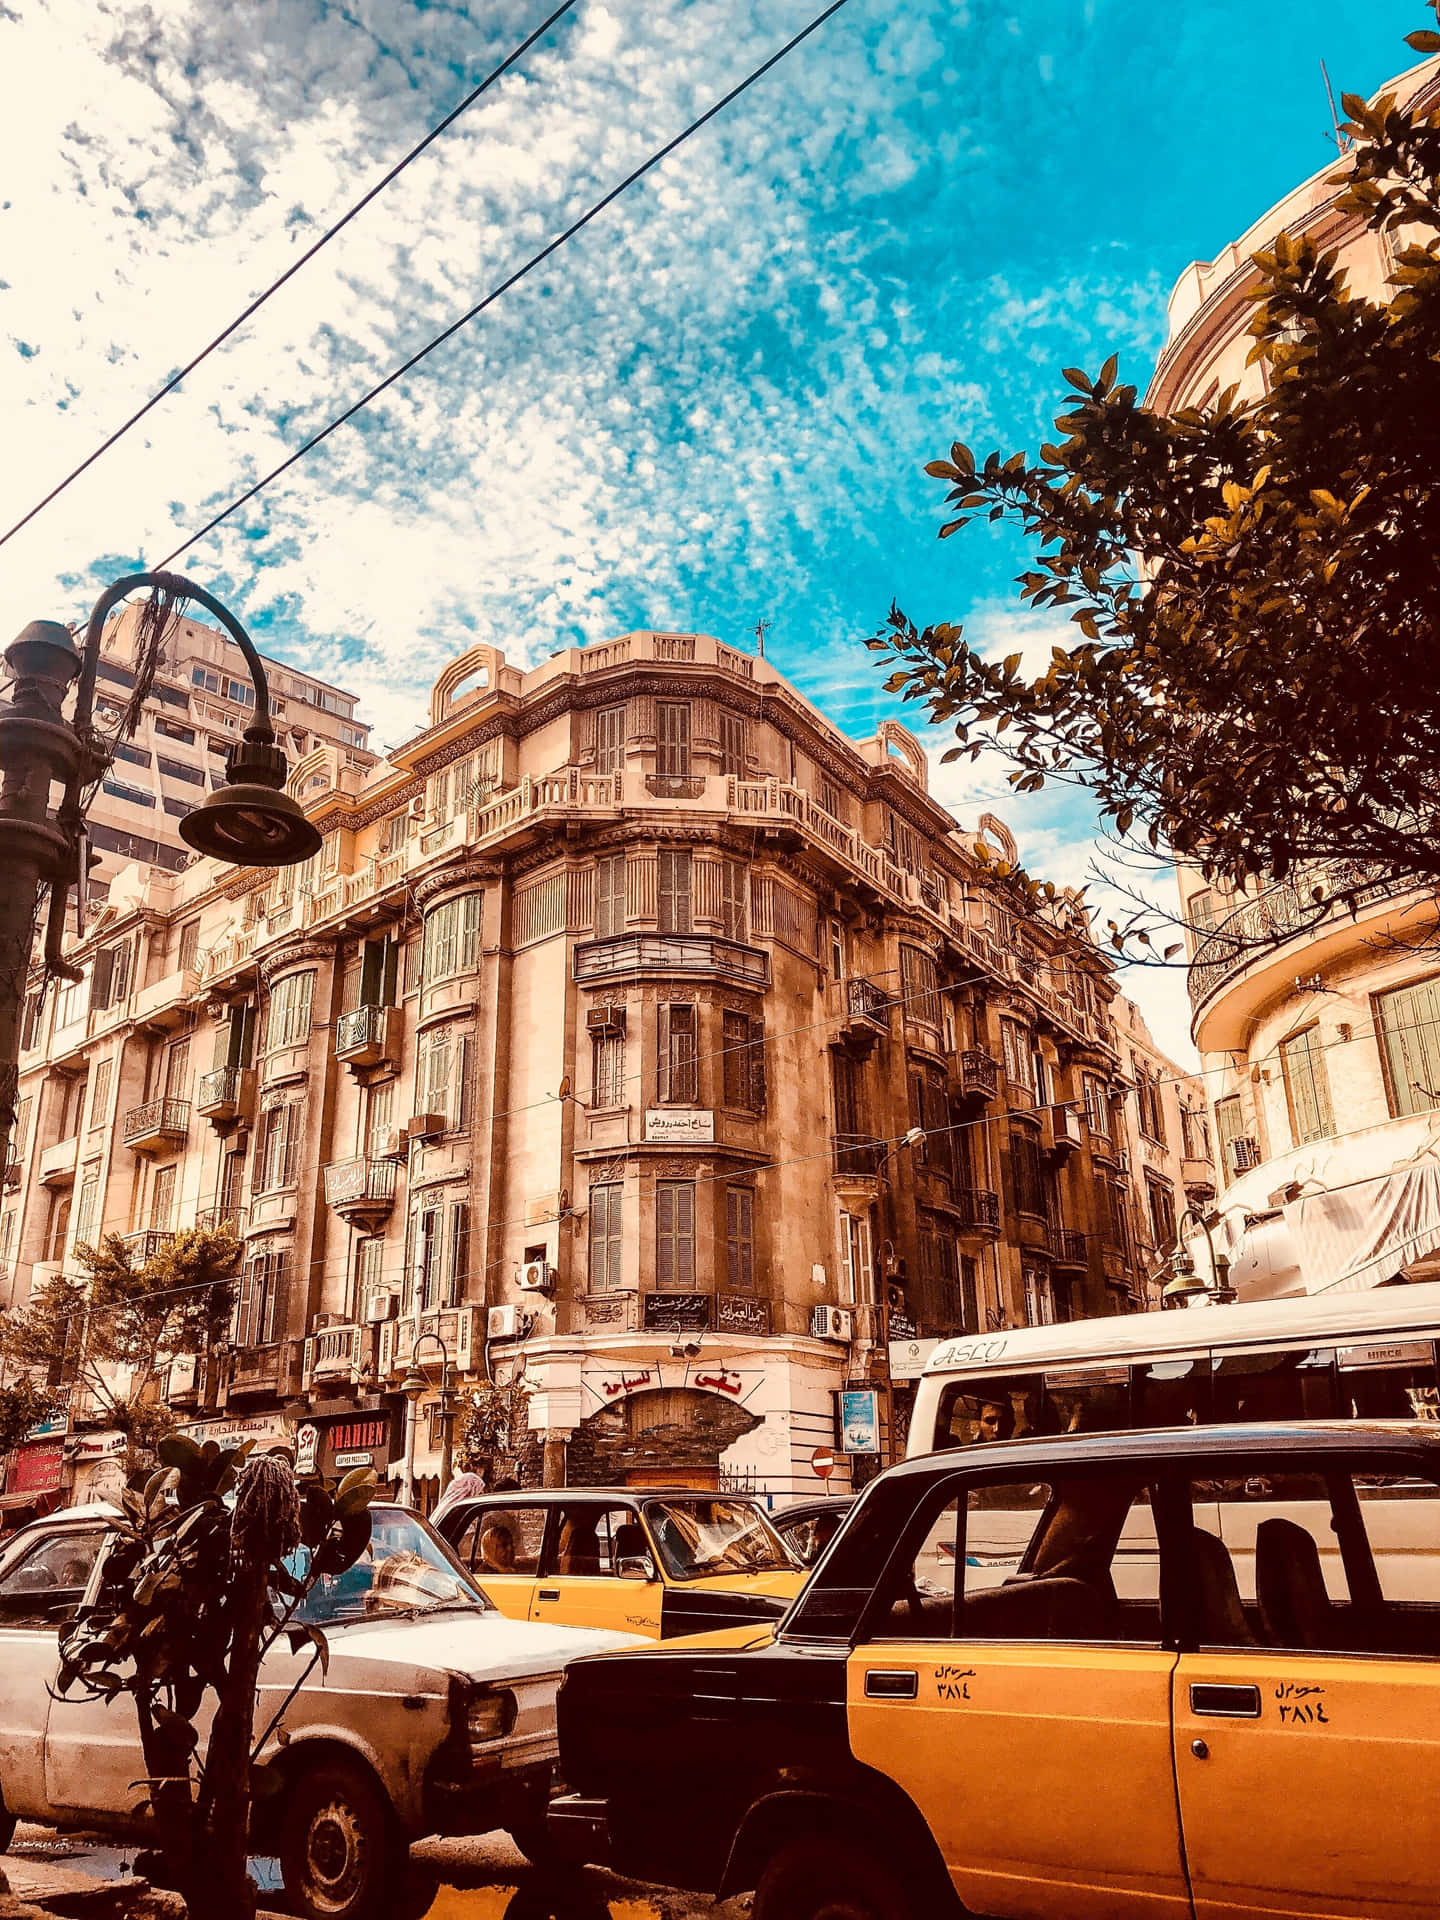 The Magnificent Architecture of Alexandria, Egypt